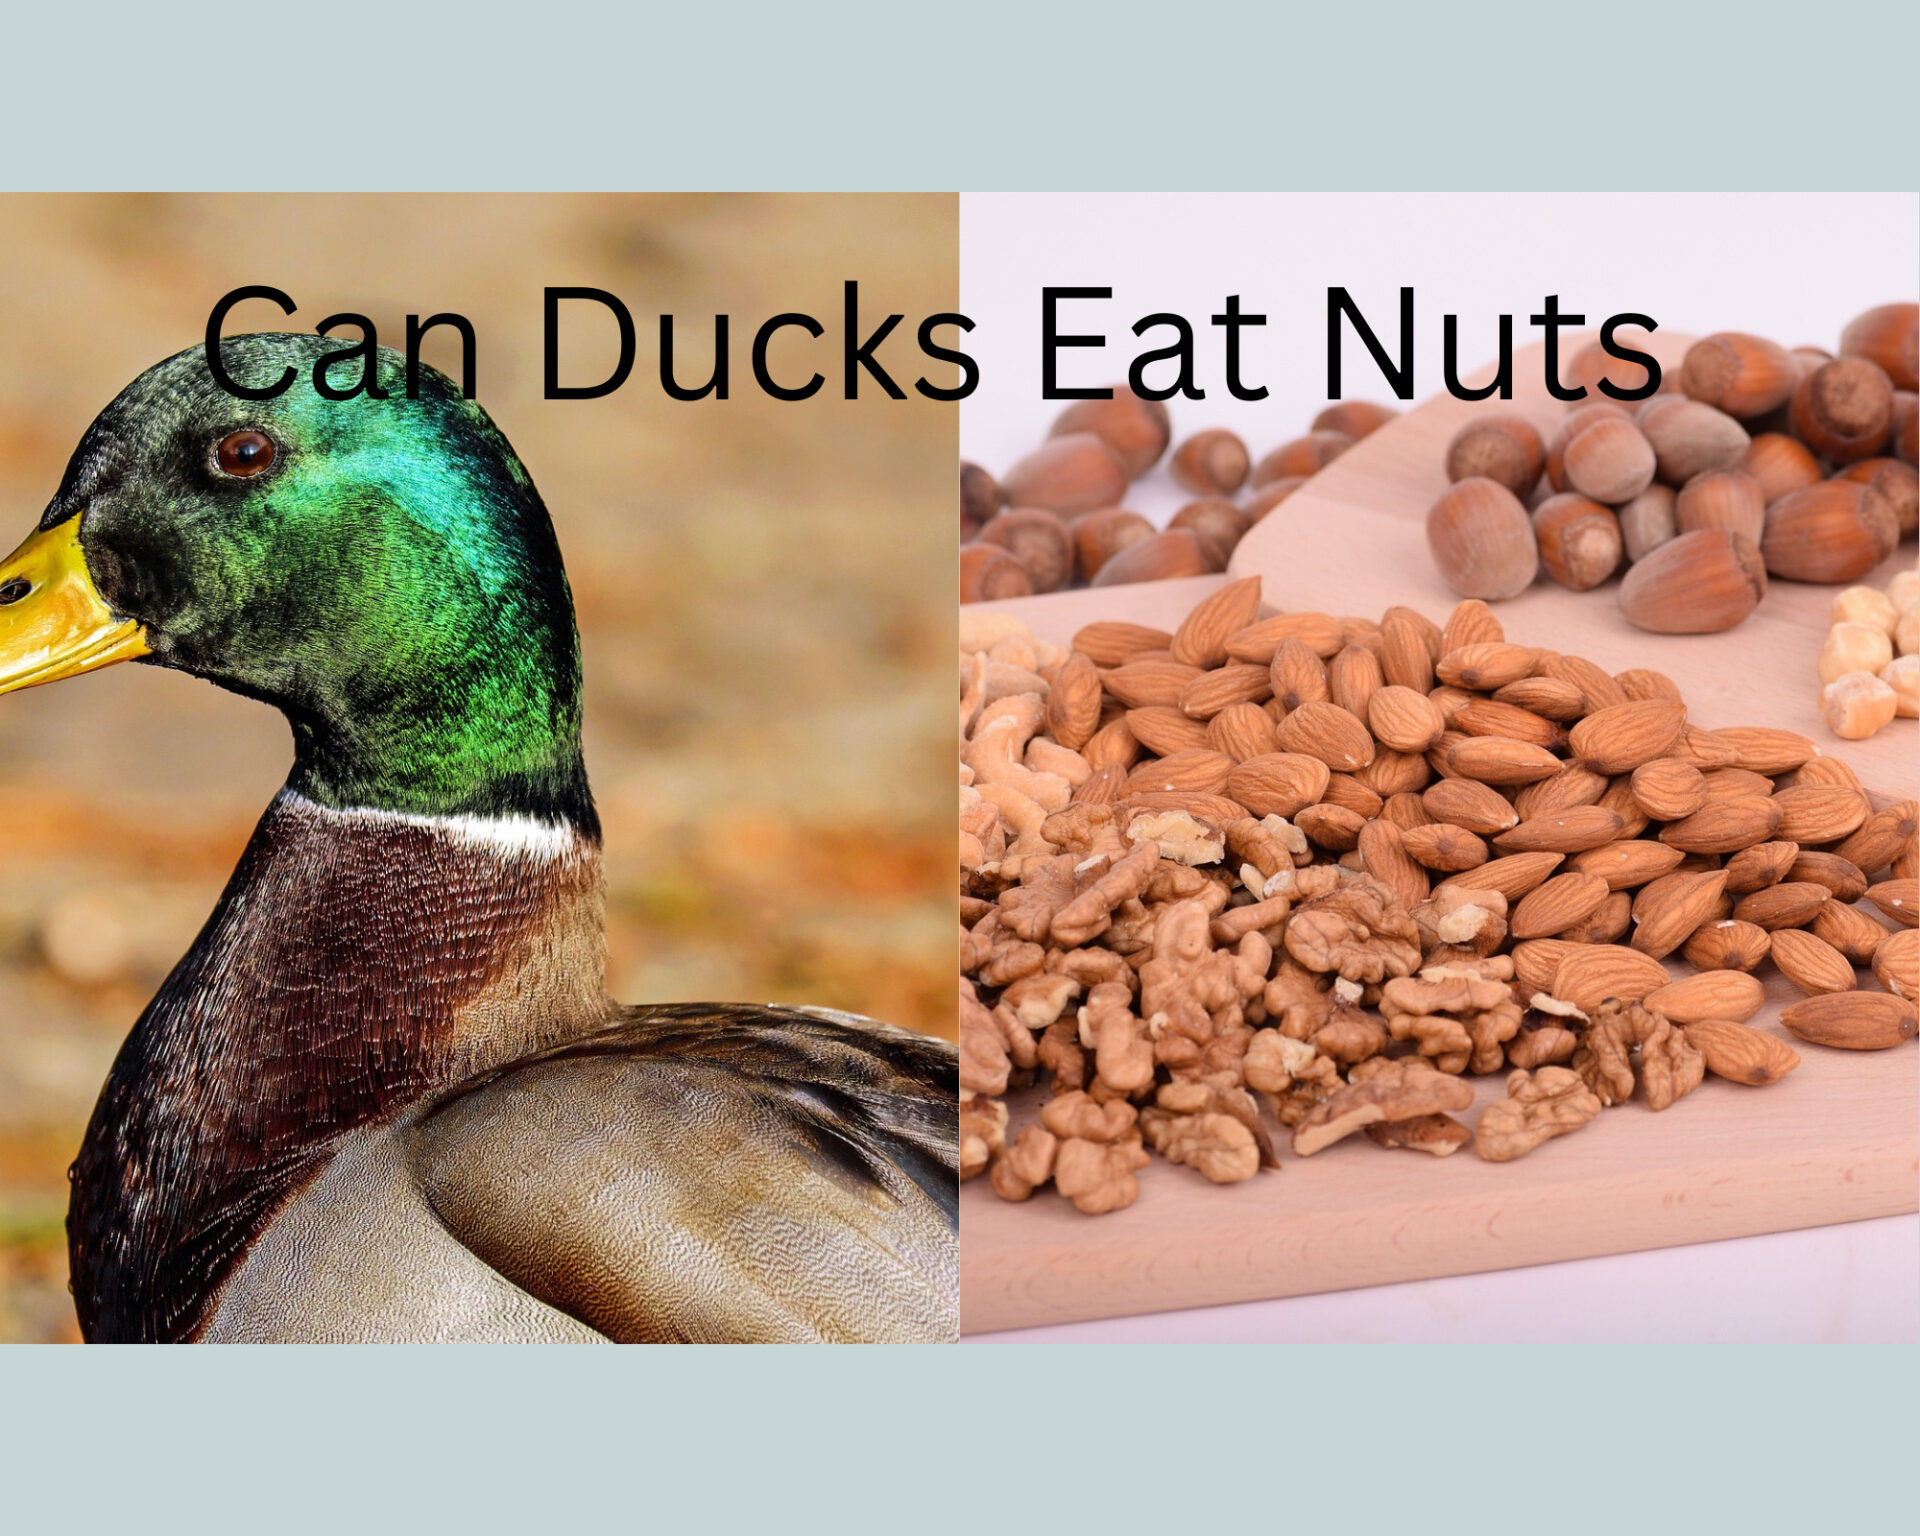 Can Ducks Eat Nuts?